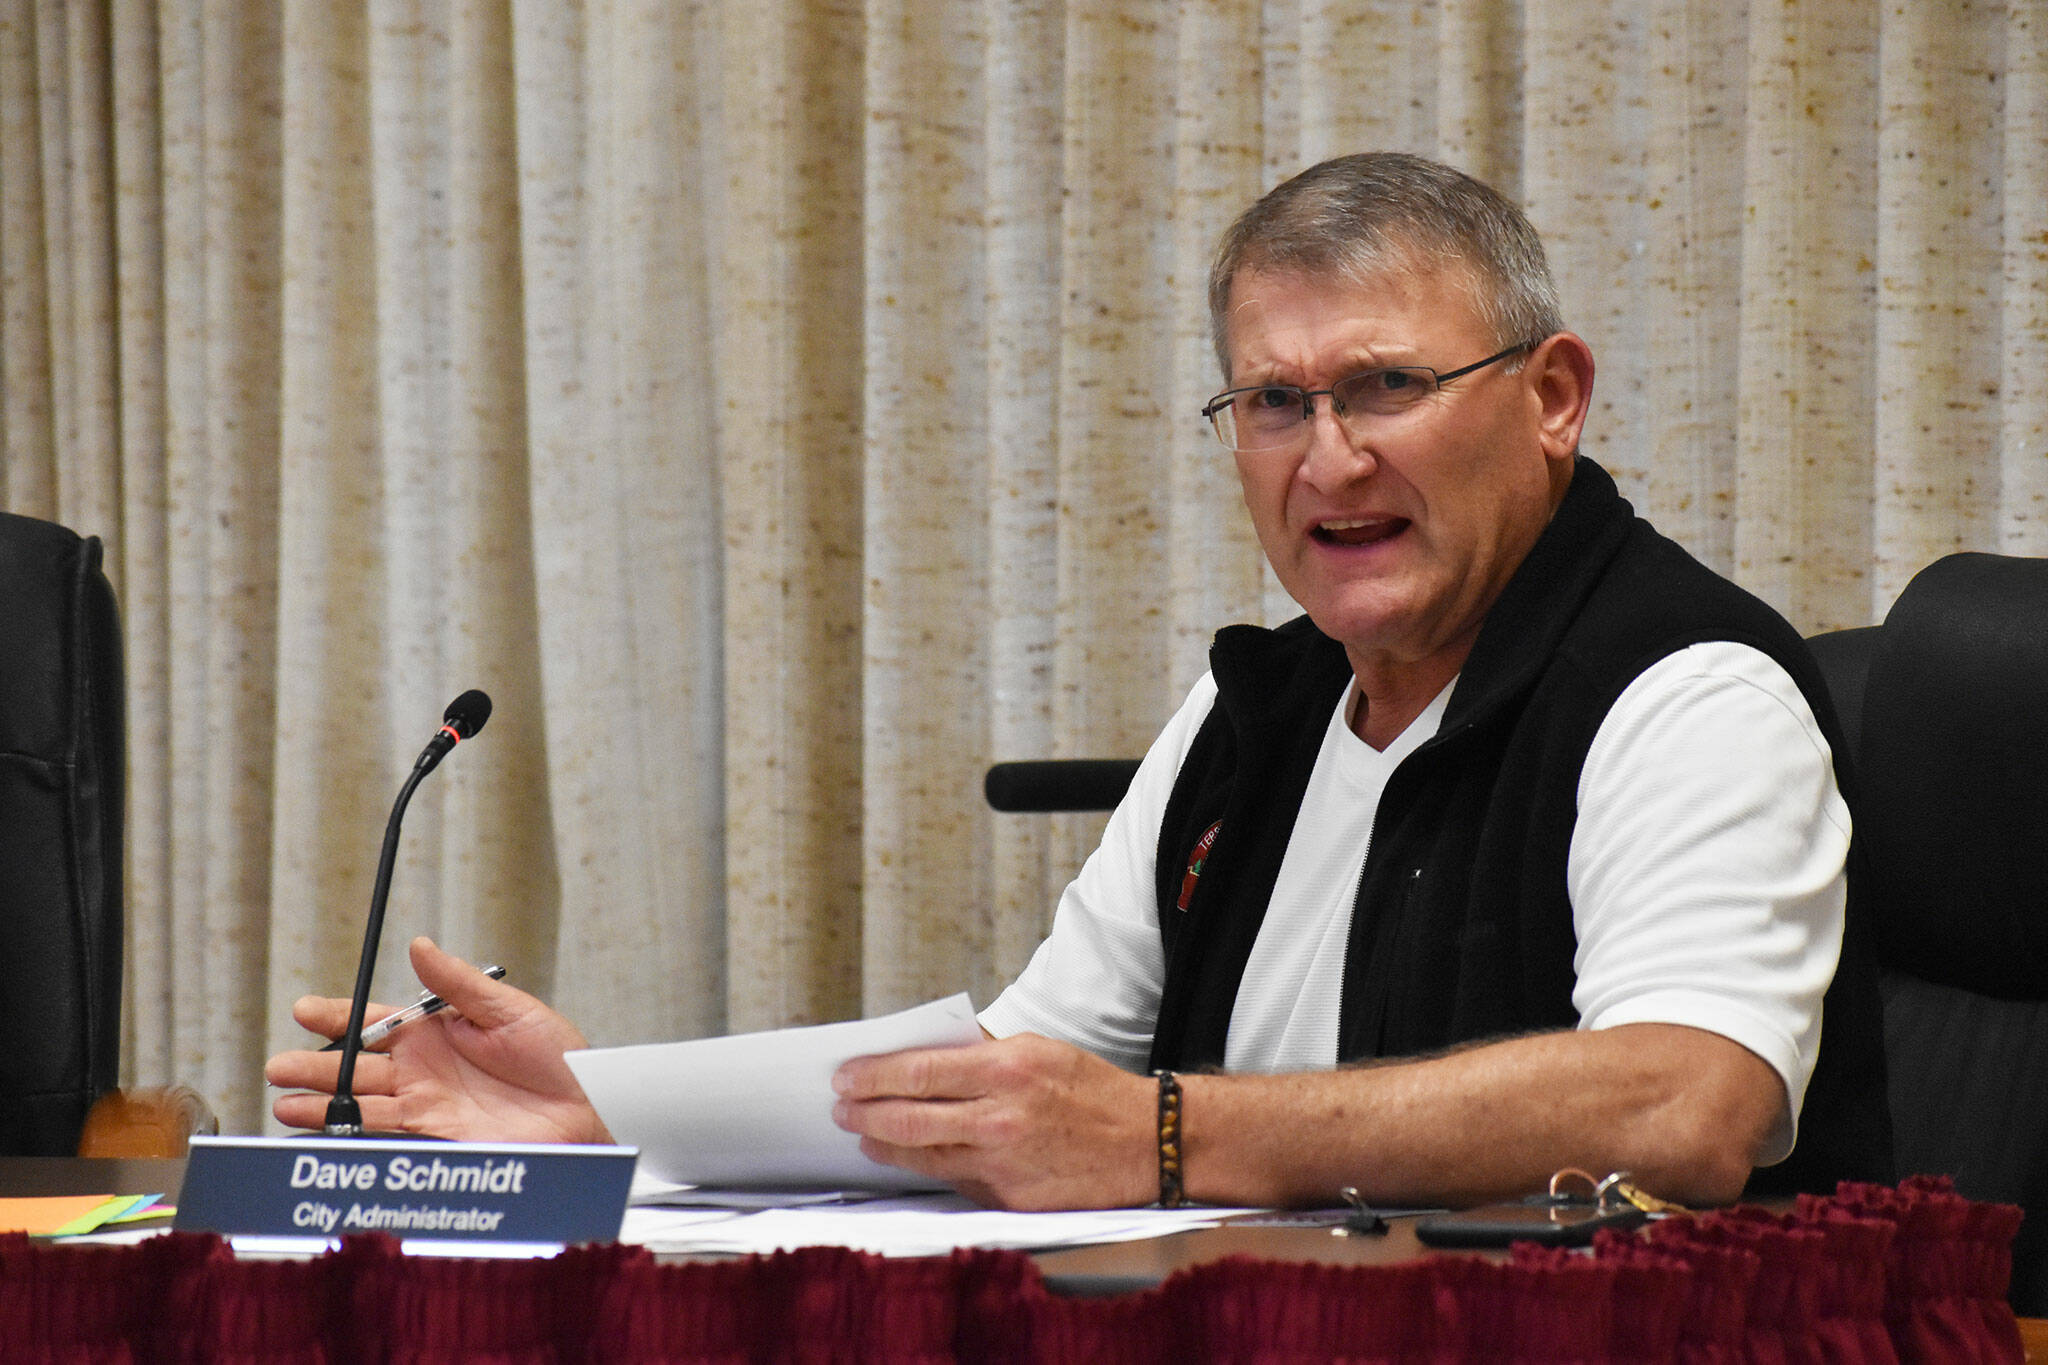 Former City Administrator Dave Shmidt speaks during a council meeting in this 2022 file photo.